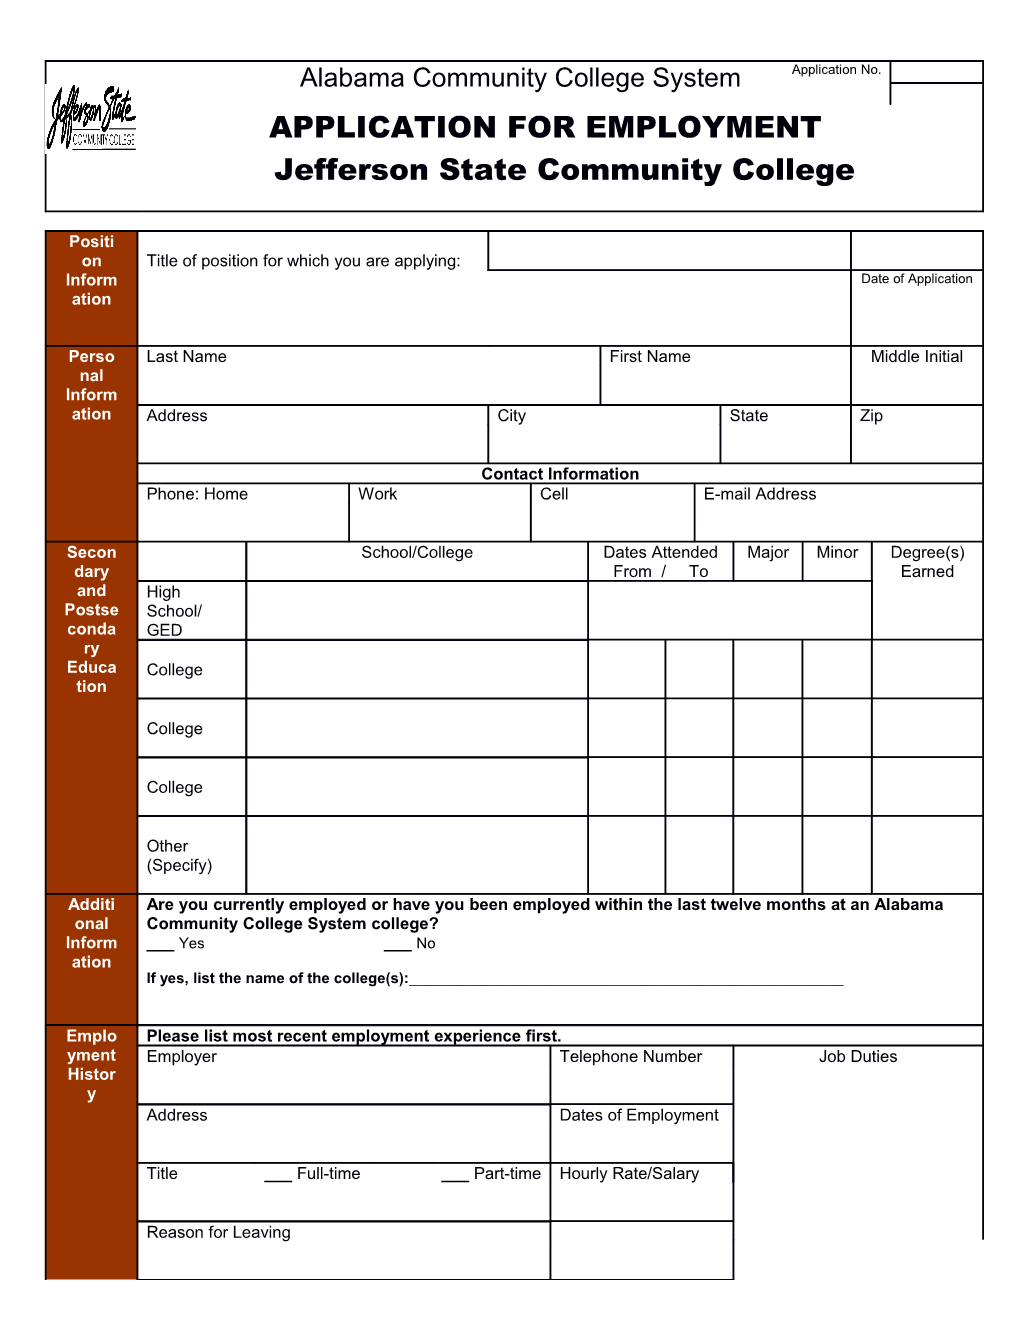 Are You a Member of the Alabama Community College System Applicant Pool? ___ Yes ___ No